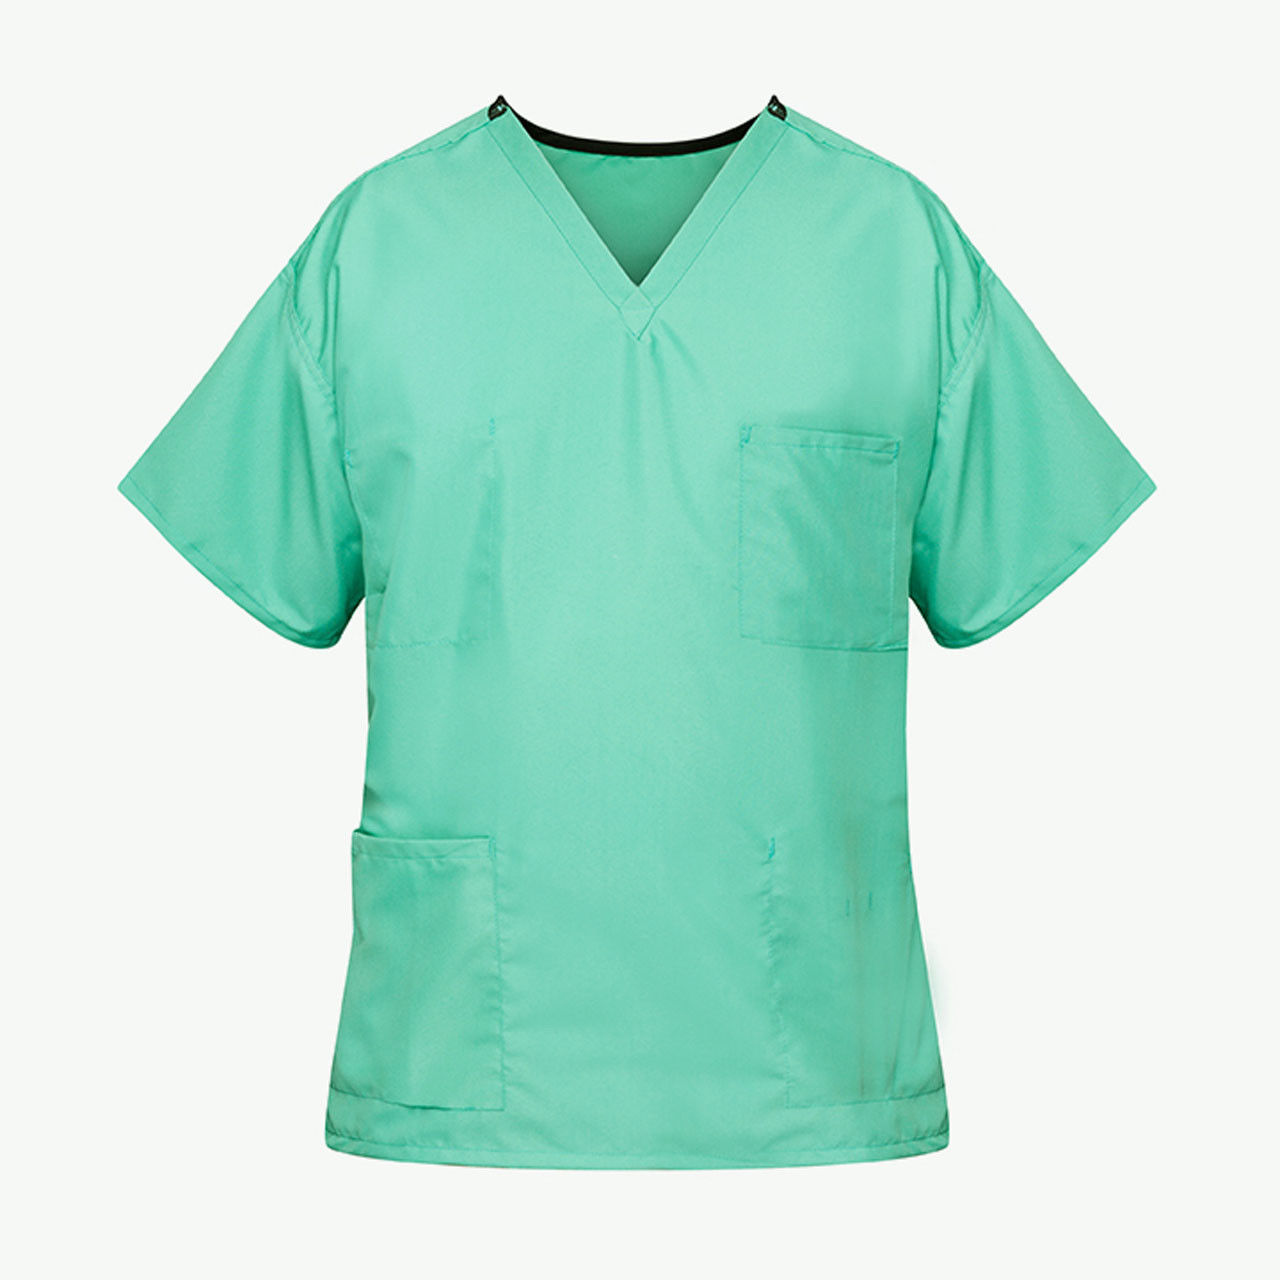 Unisex Reversible Scrub Top, Jade Green - Case of 24 Questions & Answers